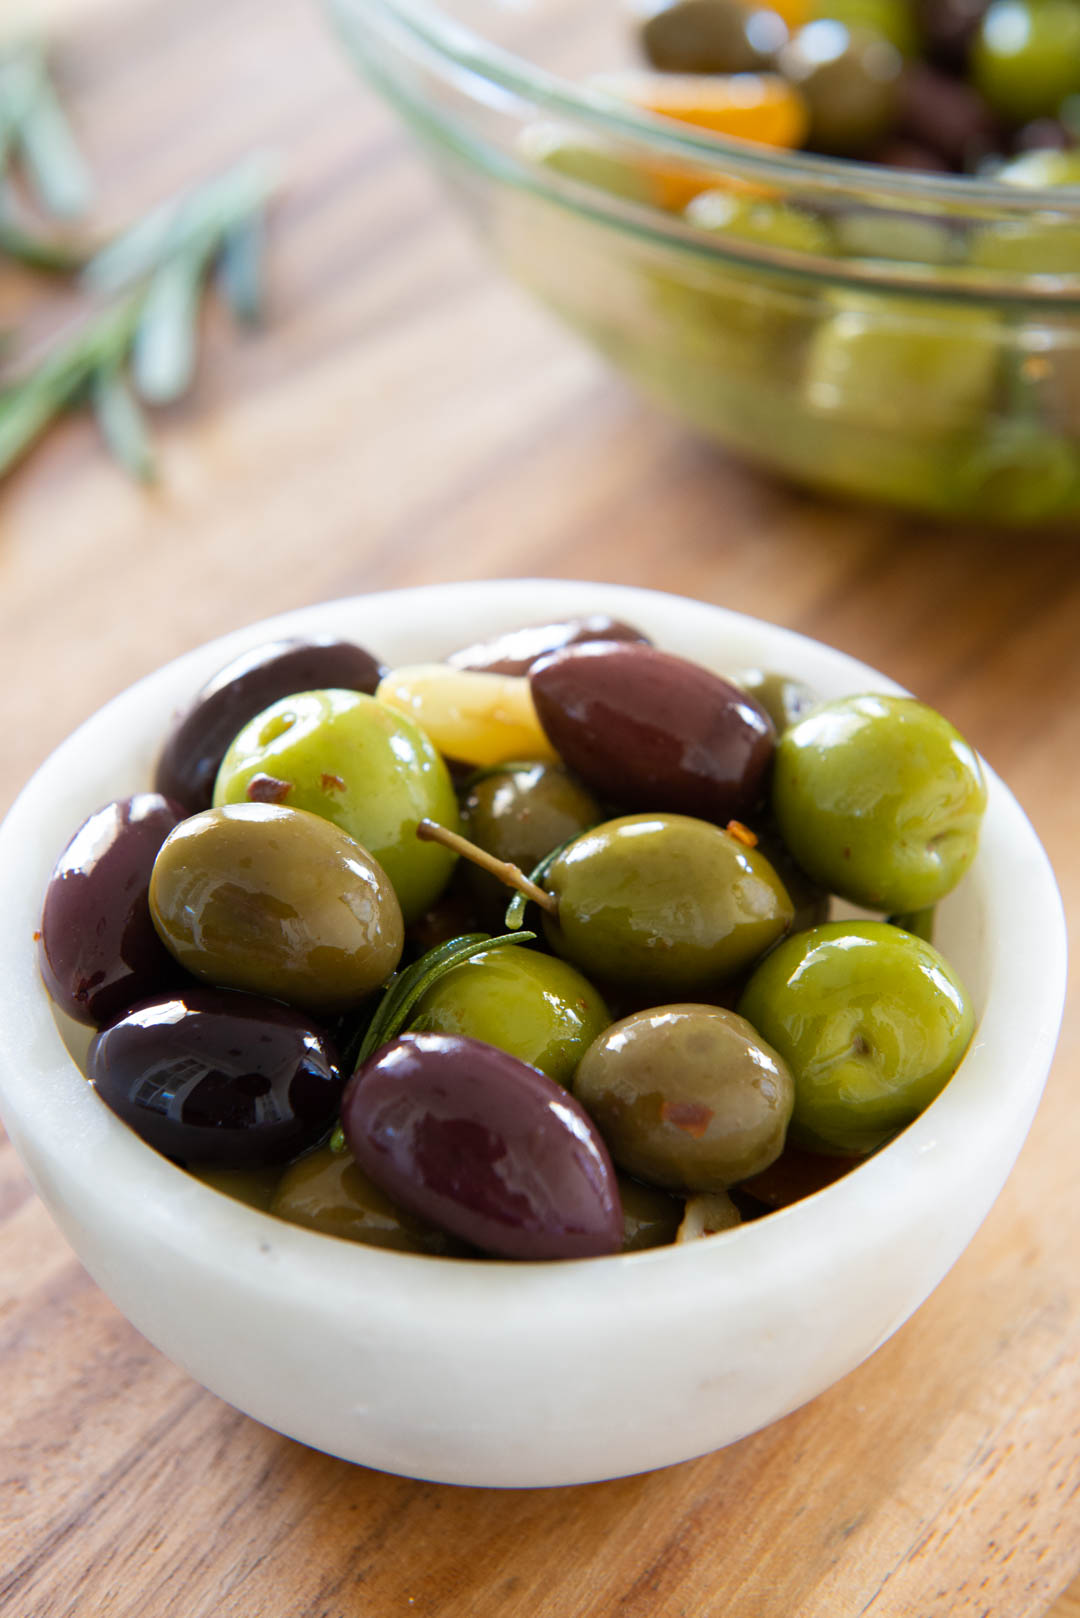 Marinated Olives Recipe: How to Make It